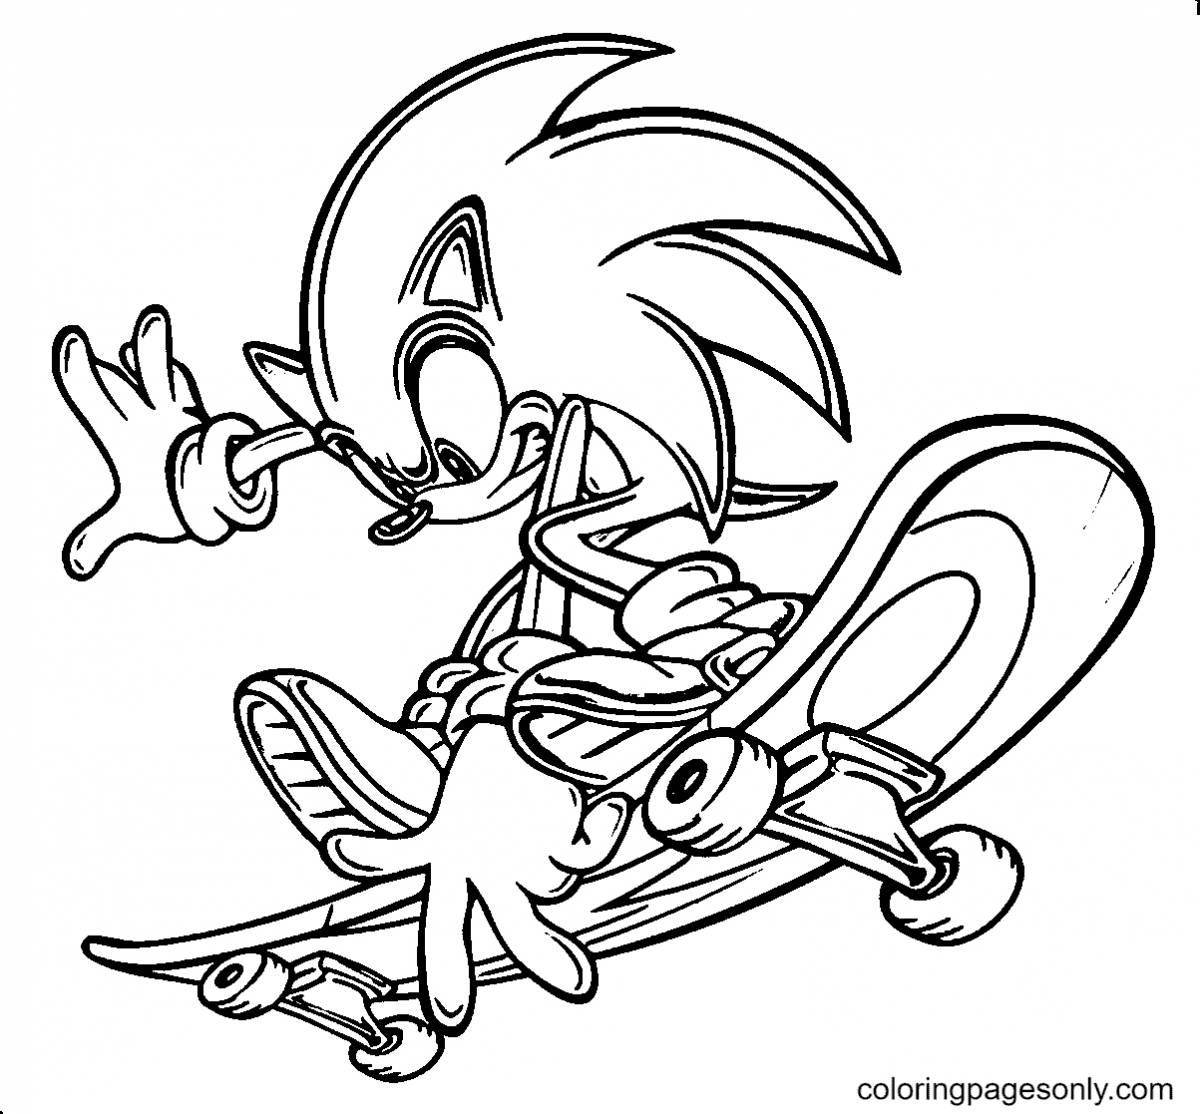 Cute mario and sonic coloring page